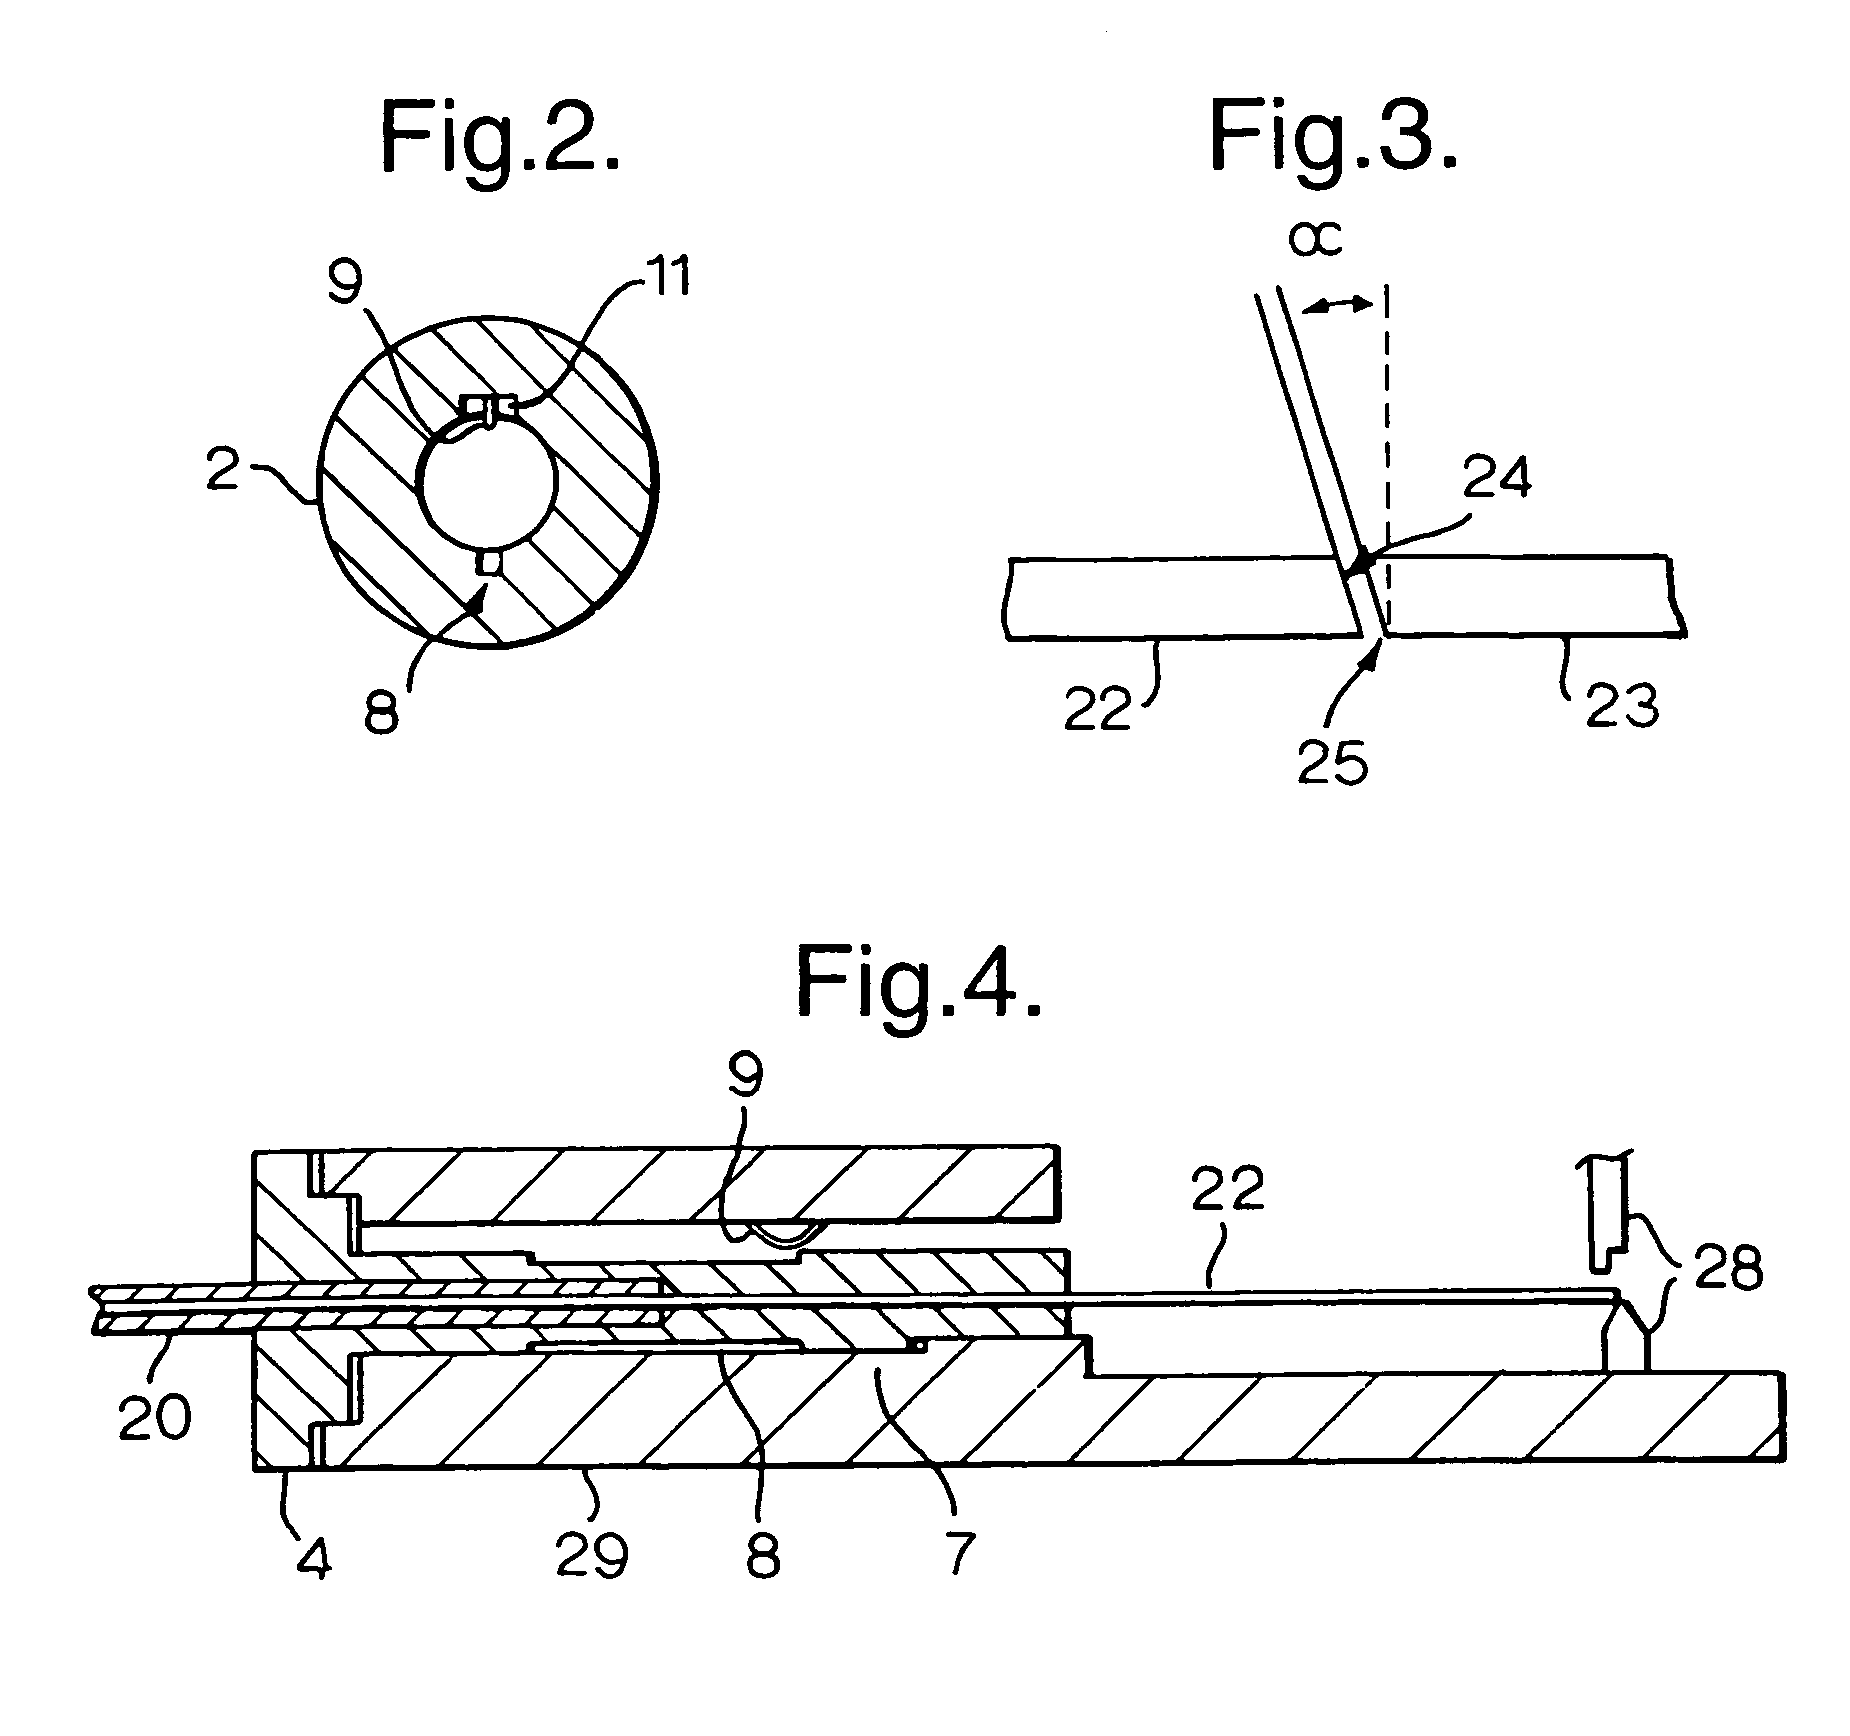 Method and apparatus for splicing optical fibres